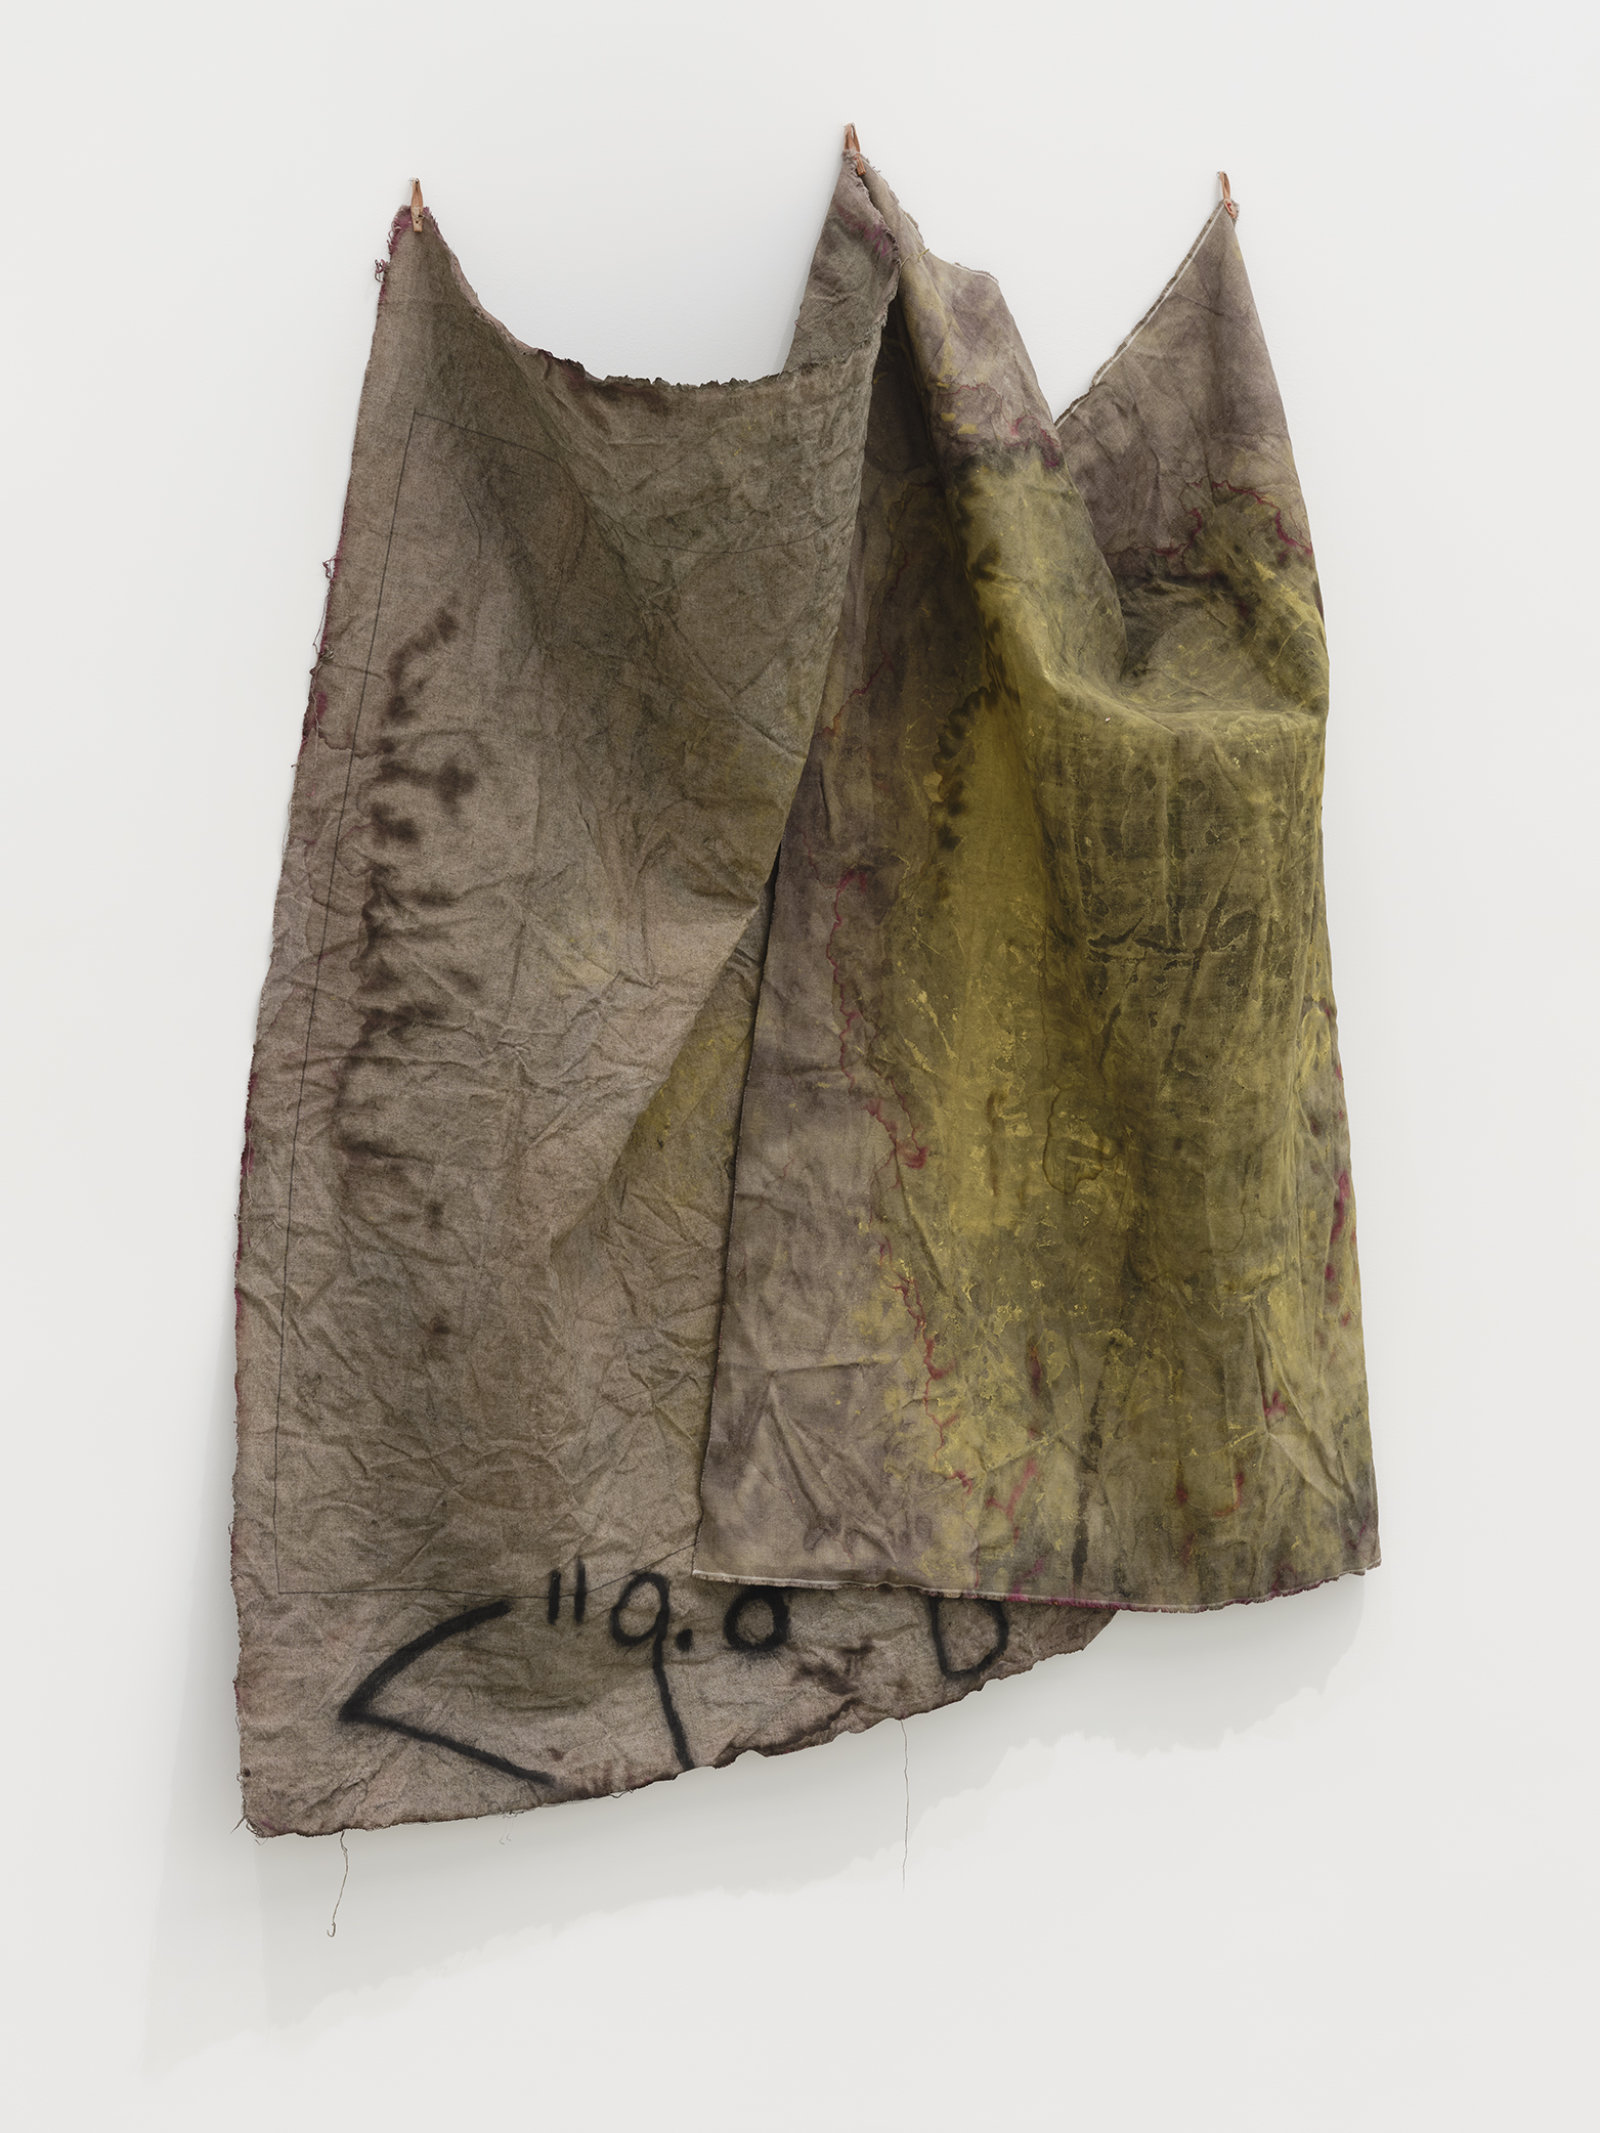 Duane Linklater, aspirated fragment, 2021, digital print on linen, cochineal dye, yellow ochre, honey, charcoal, nails, 62 x 49 x 12 in. (158 x 125 x 31 cm)